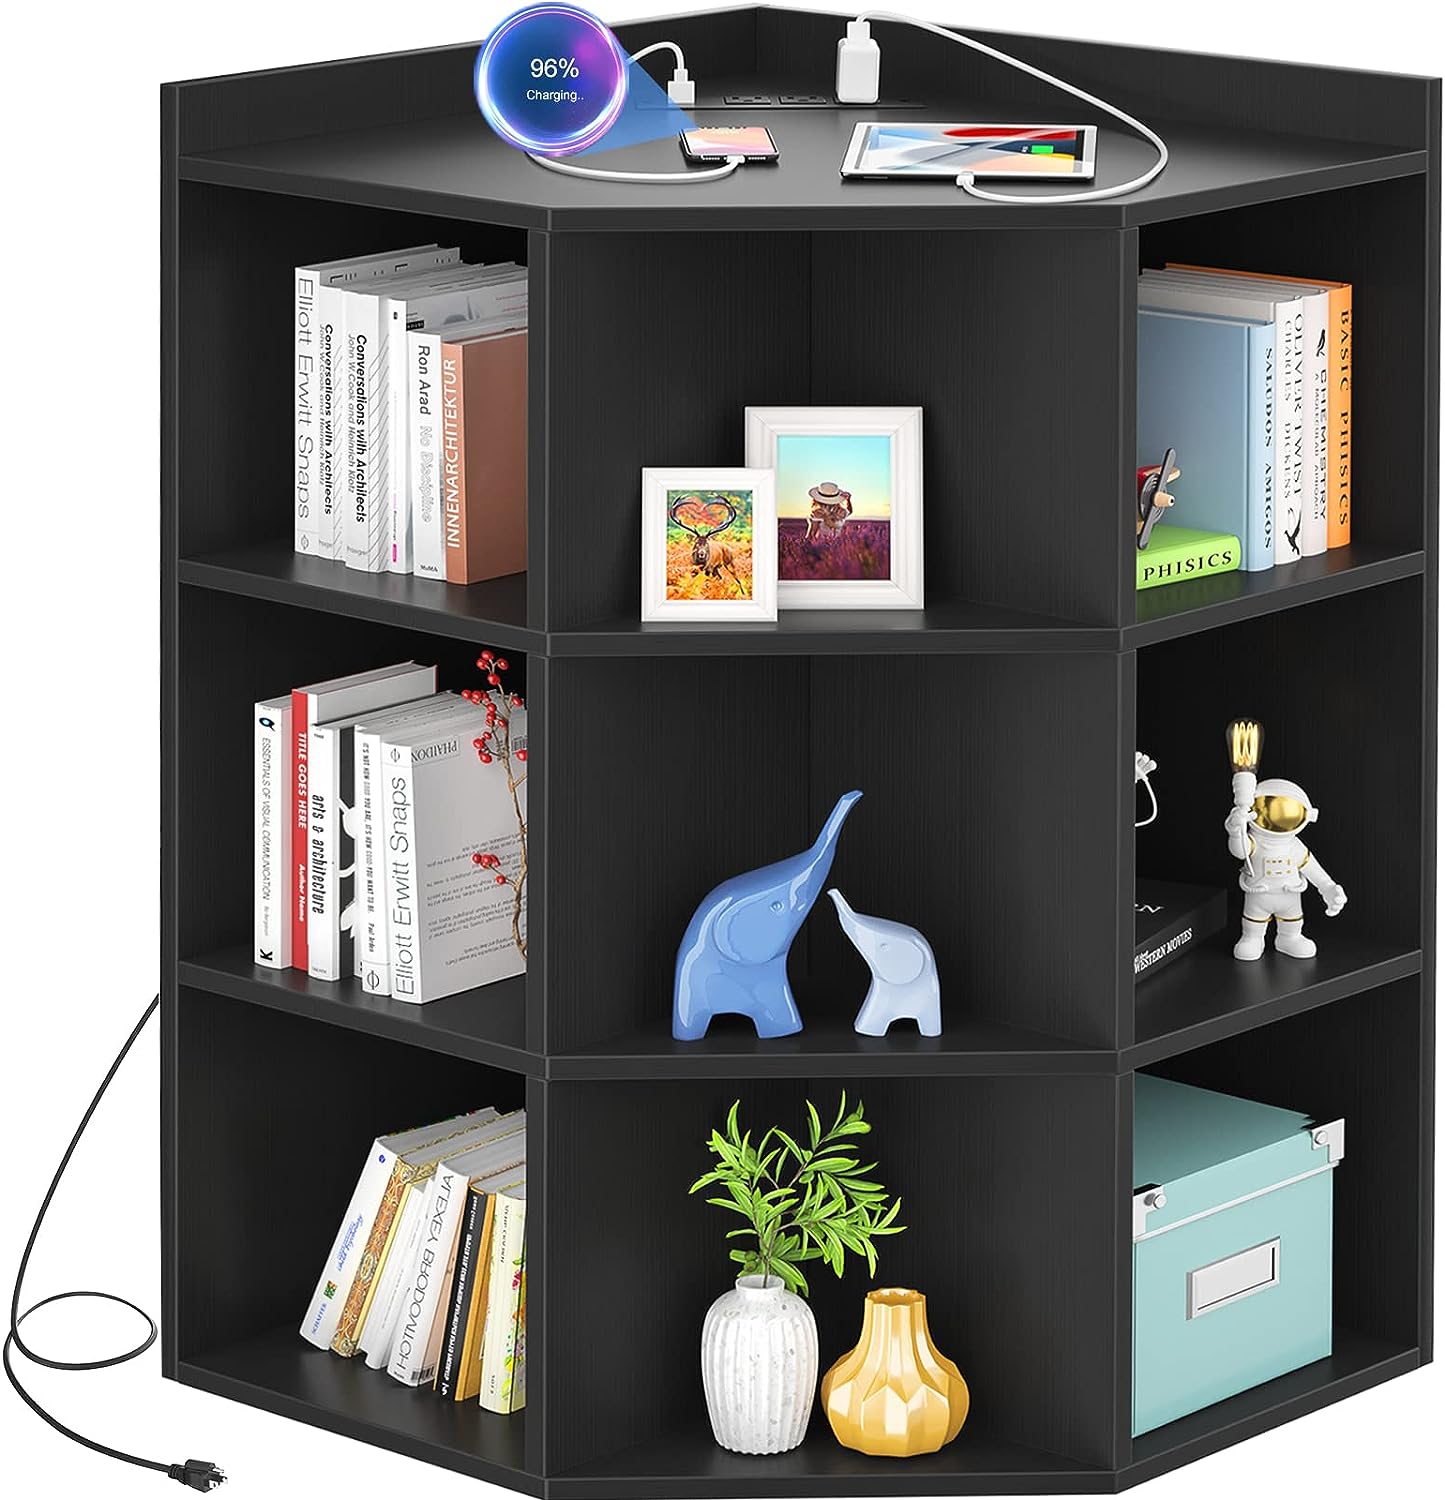 Aheaplus Corner Cabinet Storage with USB Ports and Outlets, Corner Cube Toy Storage for Small Space, Wooden Cubby Bookshelf with 9 Cubes for Playroom, Bedroom, Living Room, Black